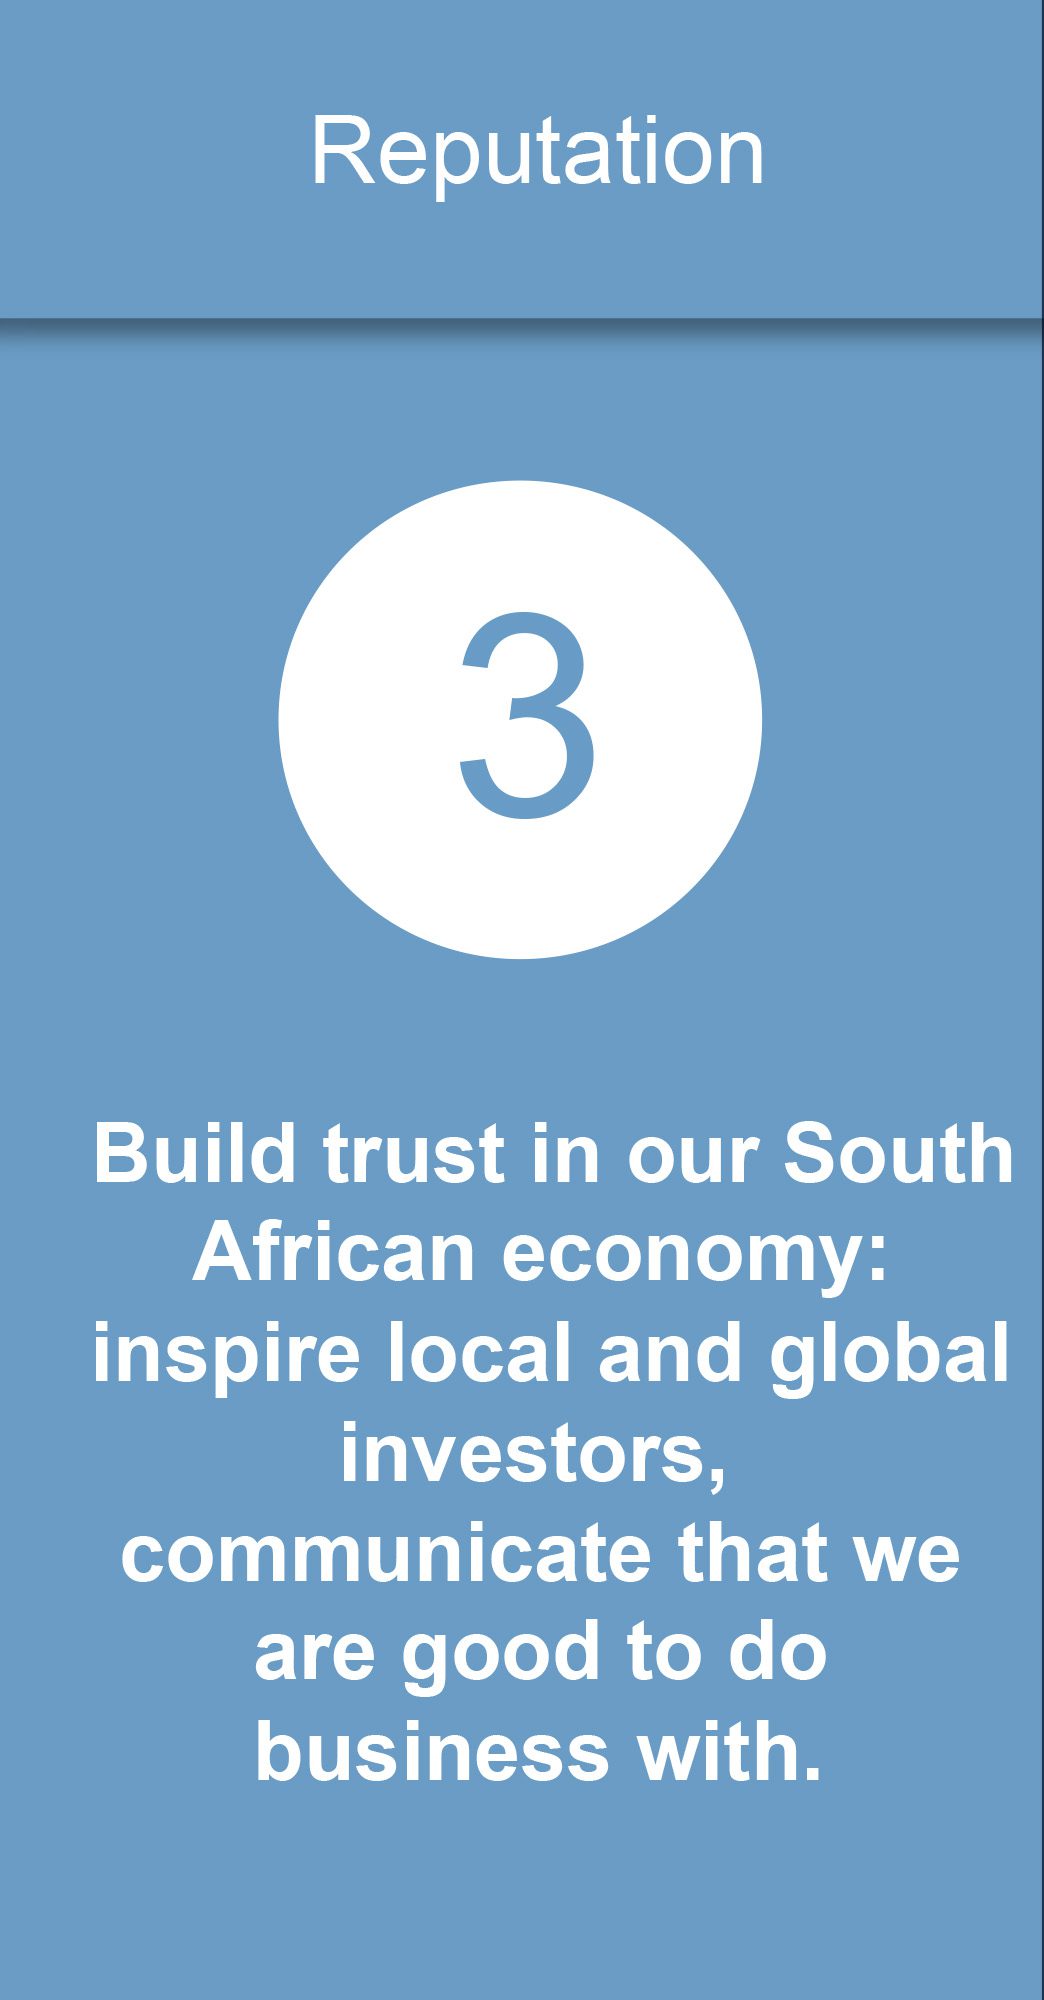 Build trust in our South African economy: inspire local and global investors, communicate that we are good to do business with.